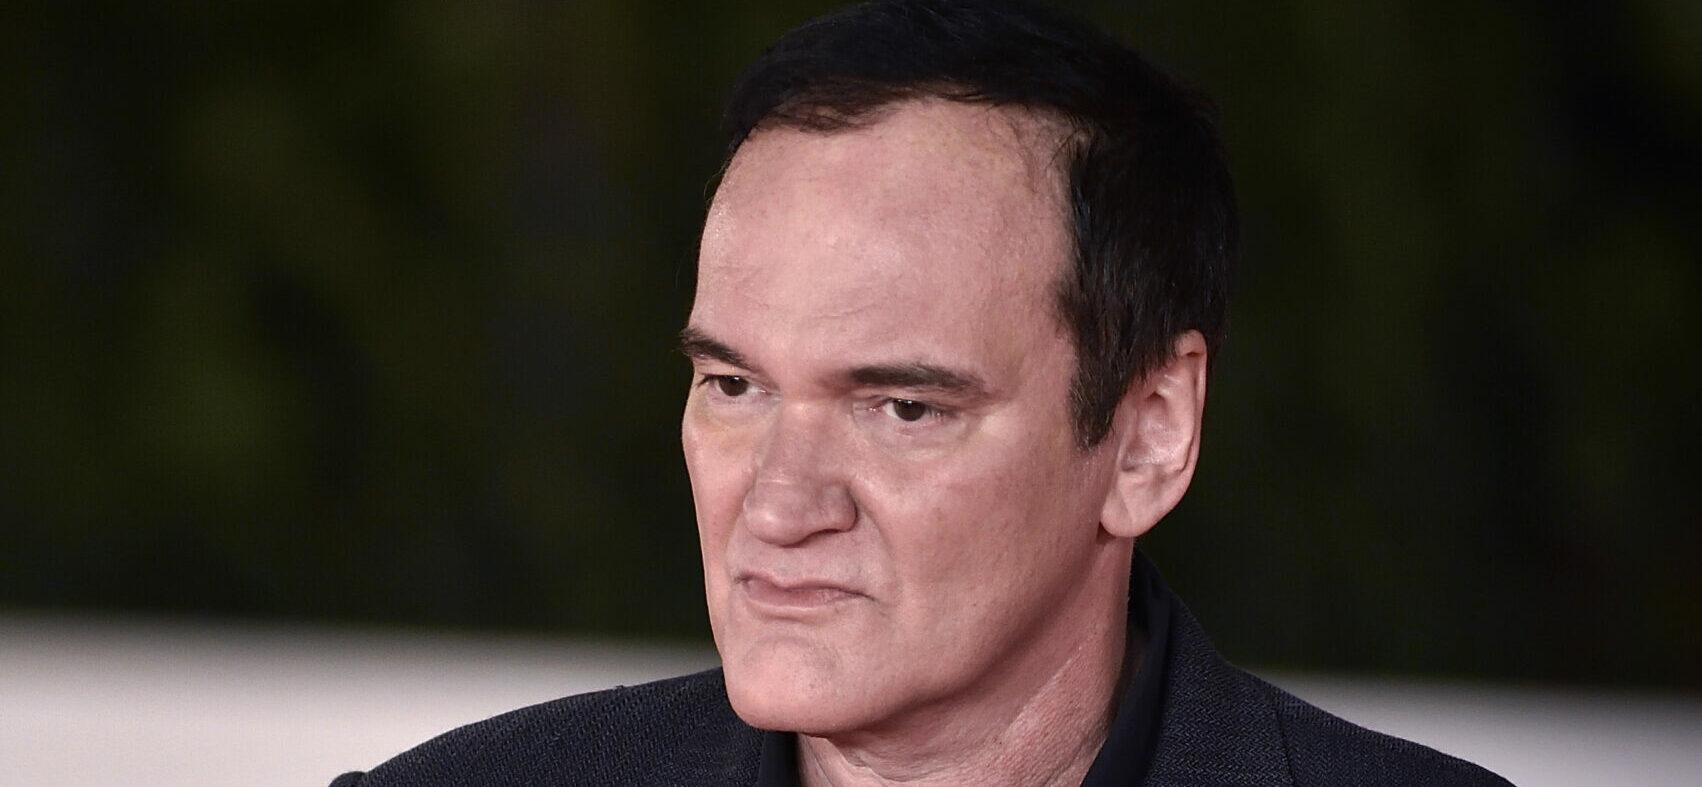 Quentin Tarantino attends the close encounter red carpet during the 16th Rome Film Fest 2021 on October 19, 2021 in Rome, Italy.